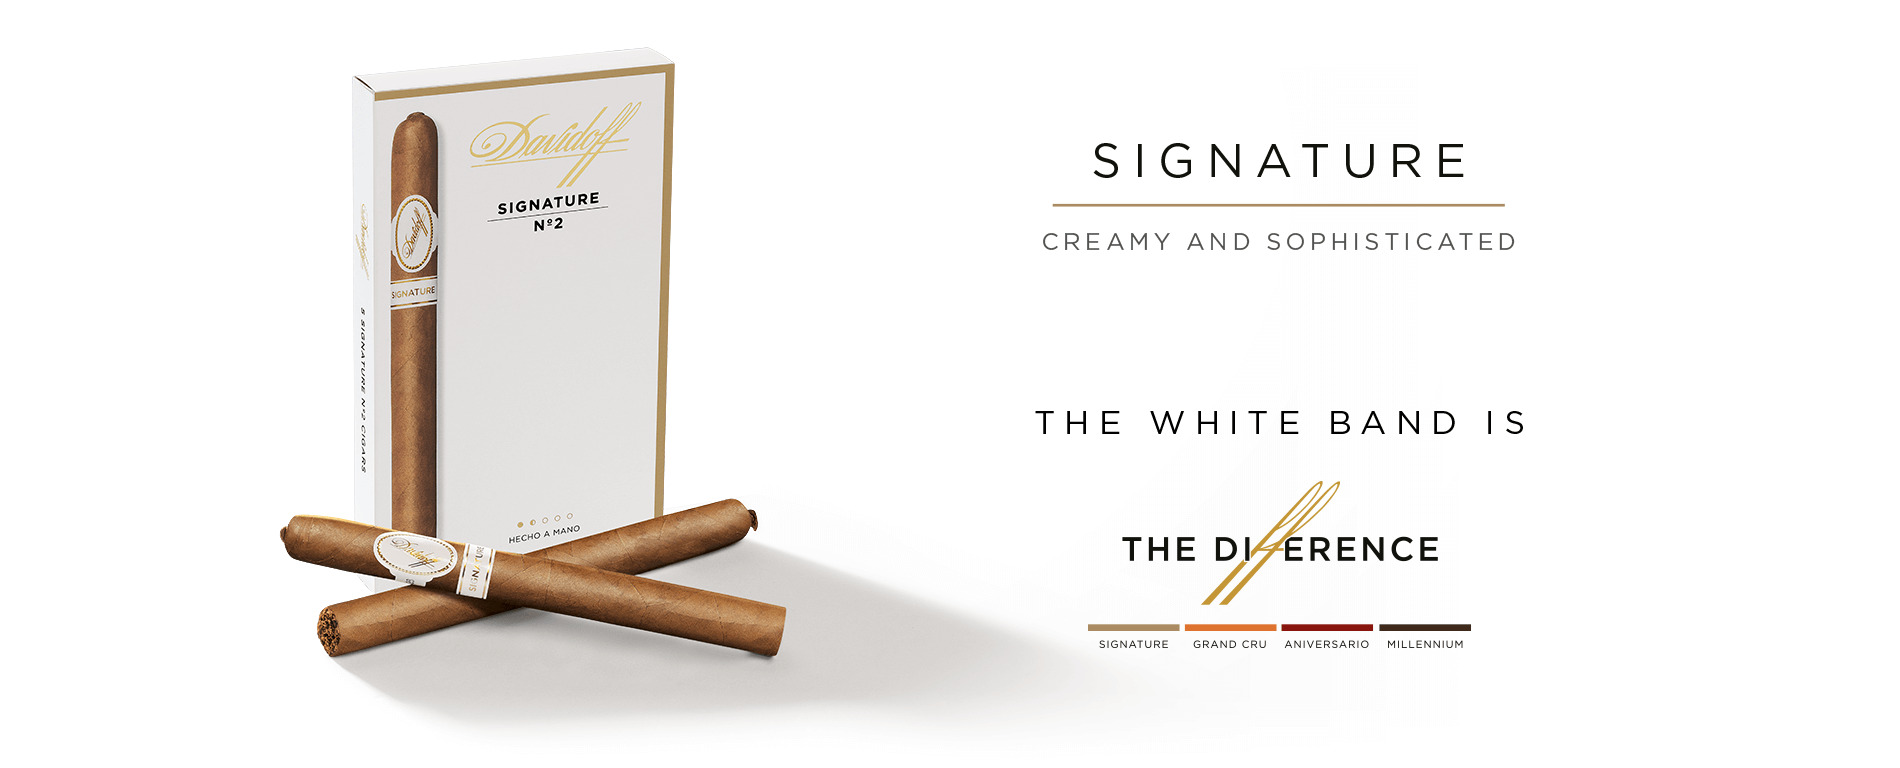 A box of Davidoff Signature No. 2 with two cigars placed crosswise in front of it.